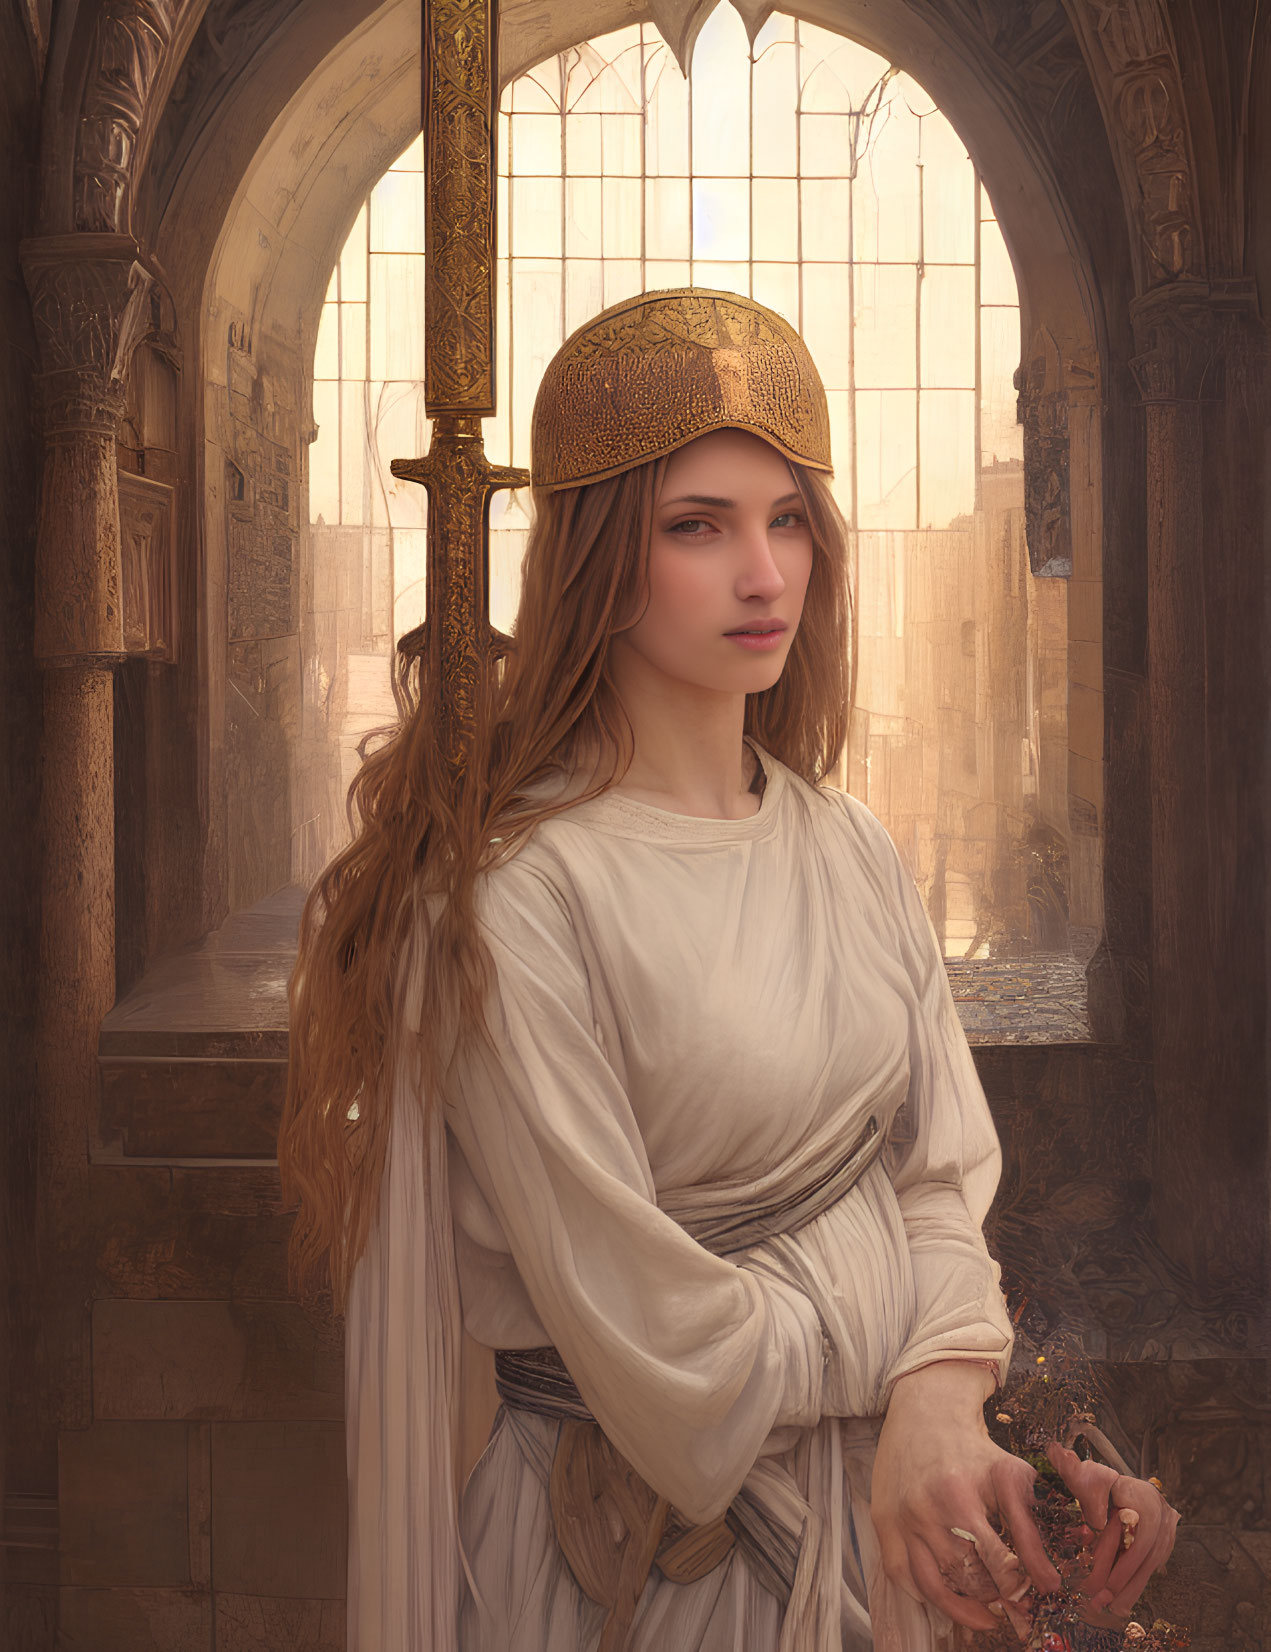 Medieval woman in gold crown holding scepter in cathedral